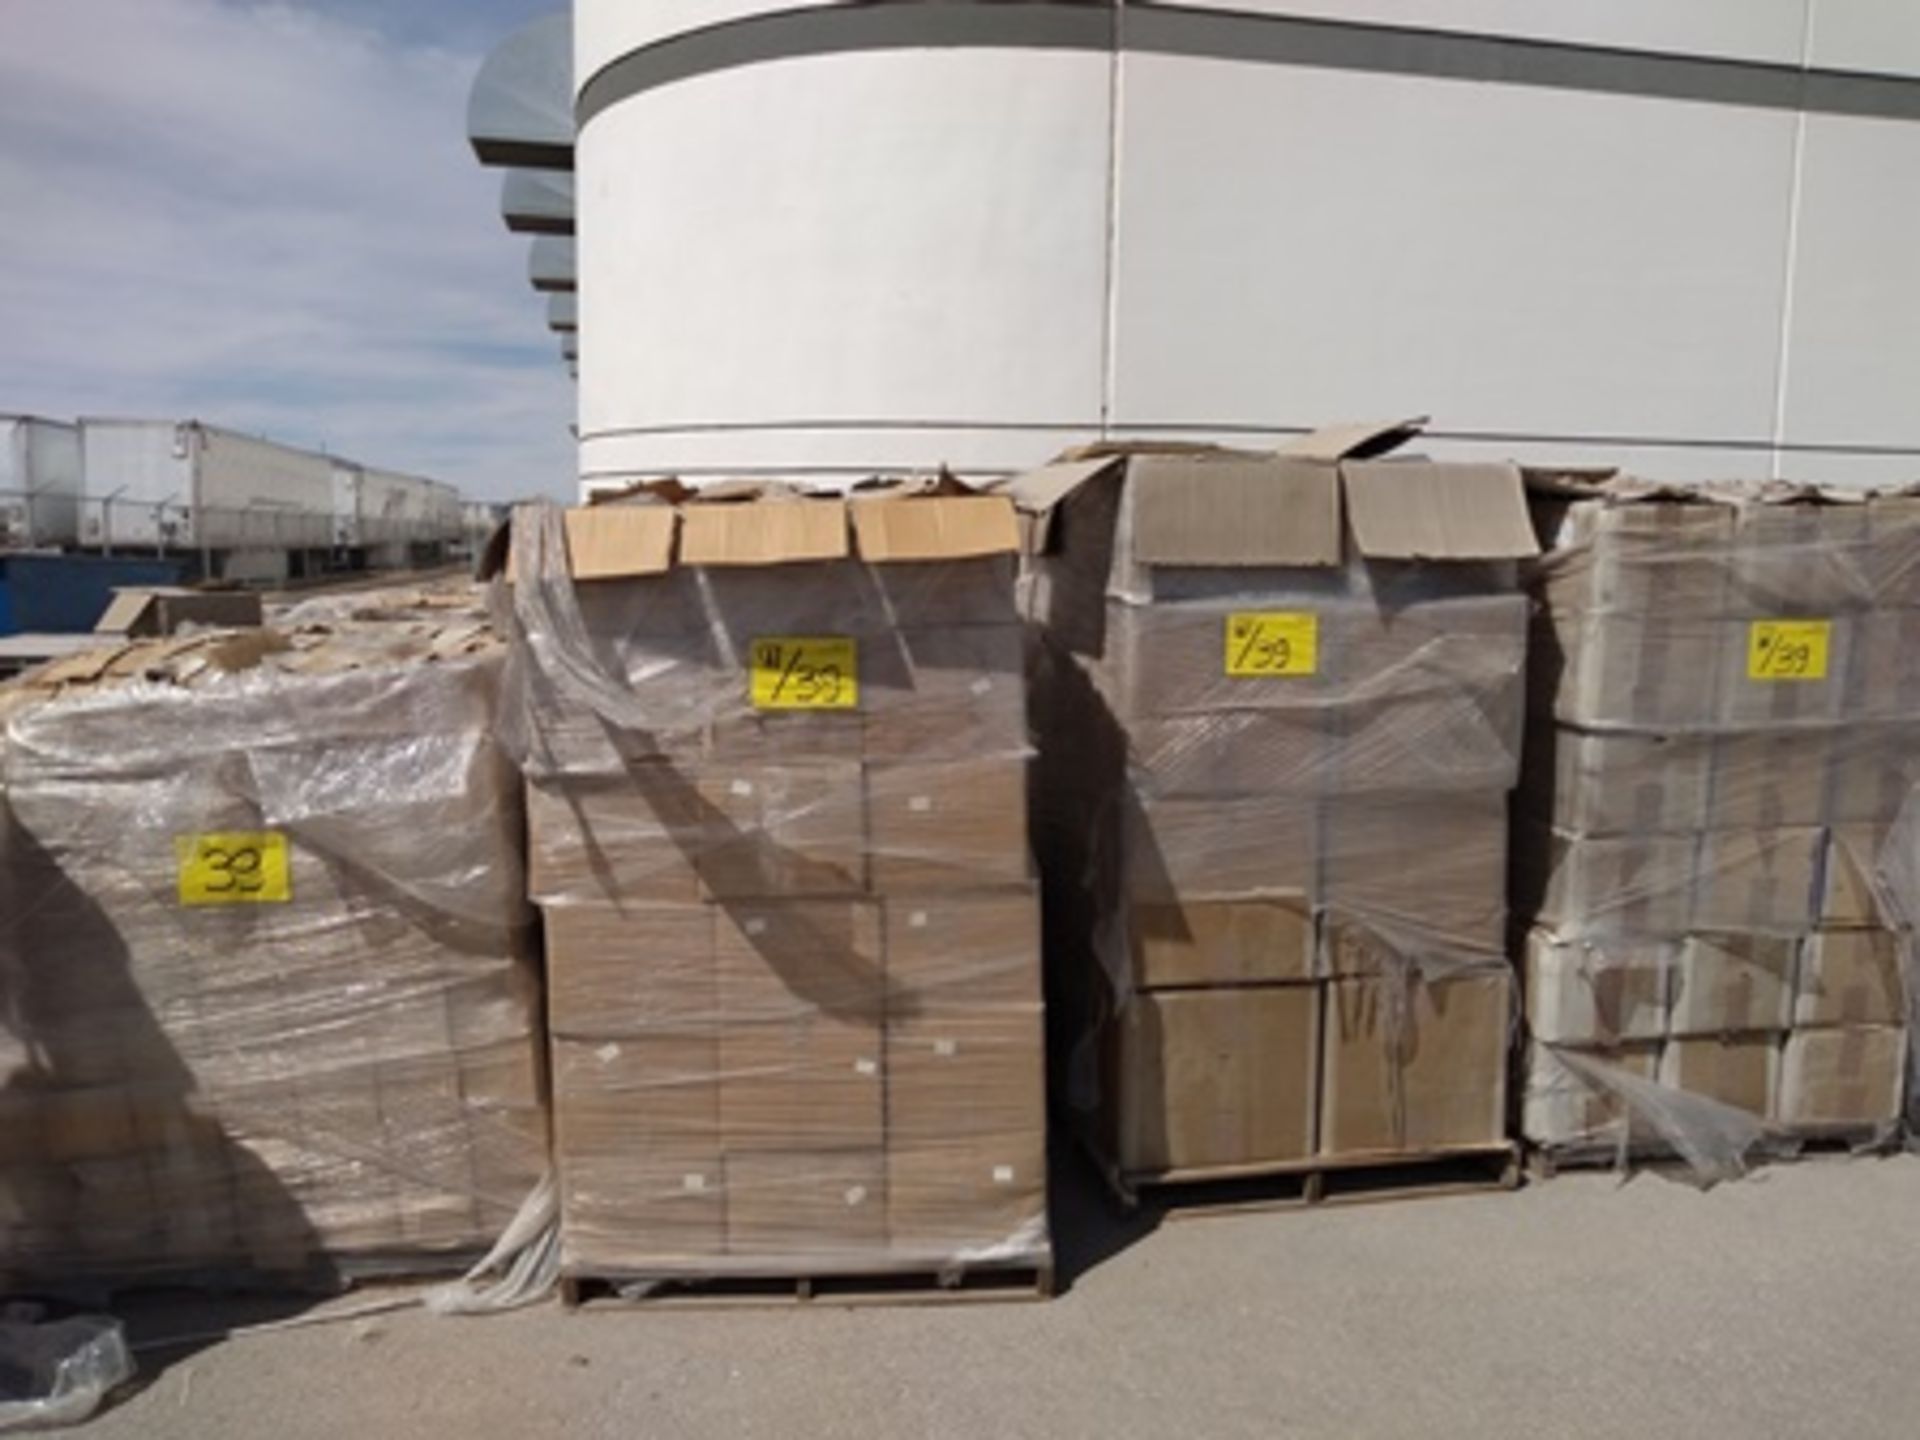 18 pallets containing: 600 boxes of finished product (egraved and shaped esteatita stones). - Image 6 of 27